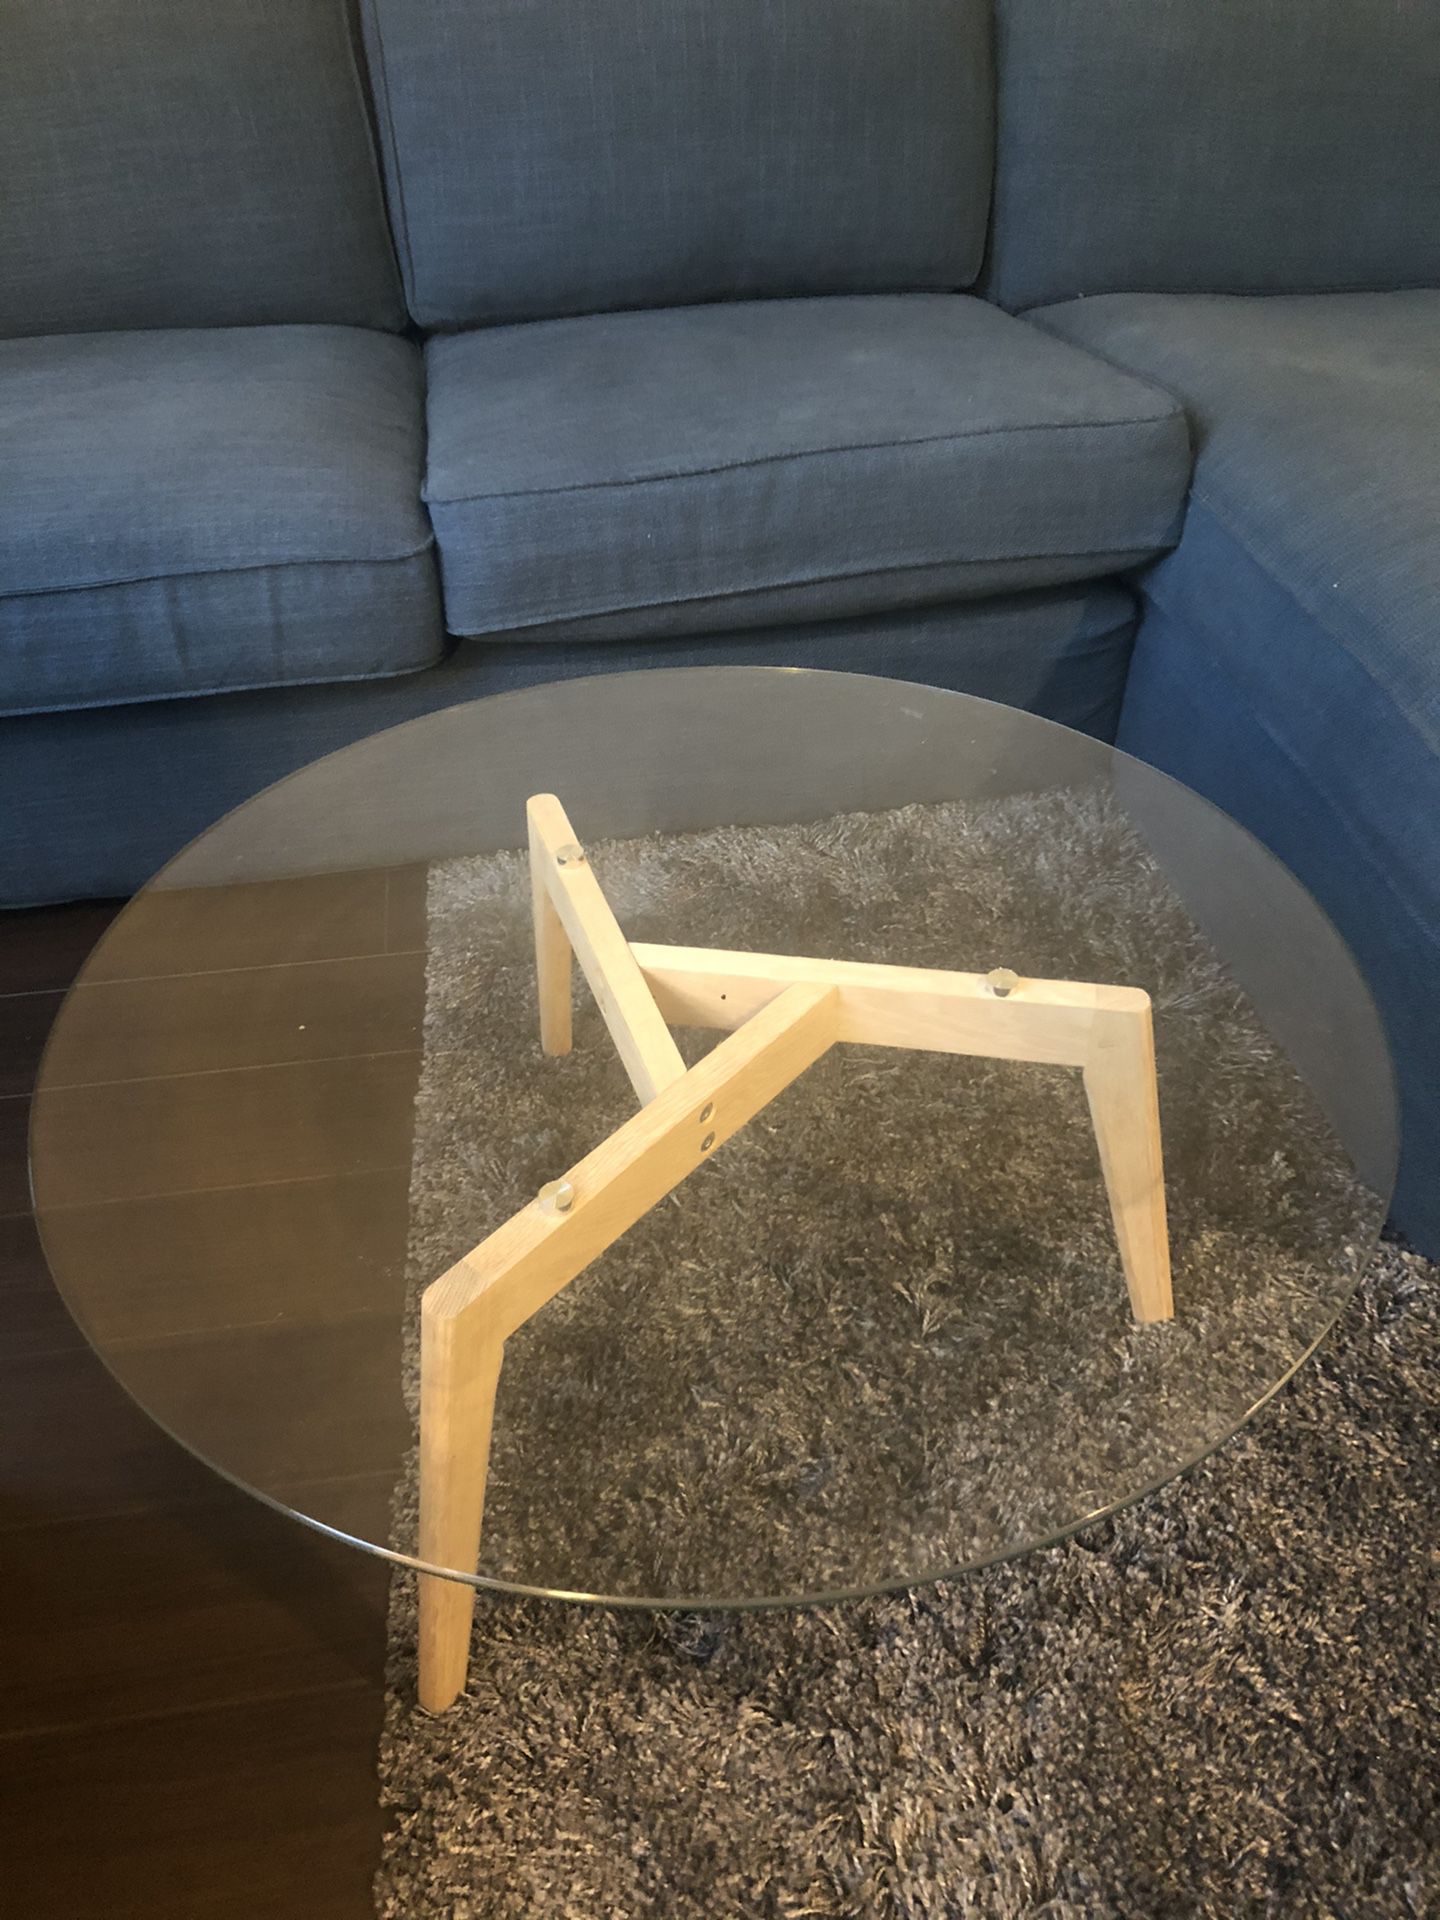 Article Clarus glass coffee table